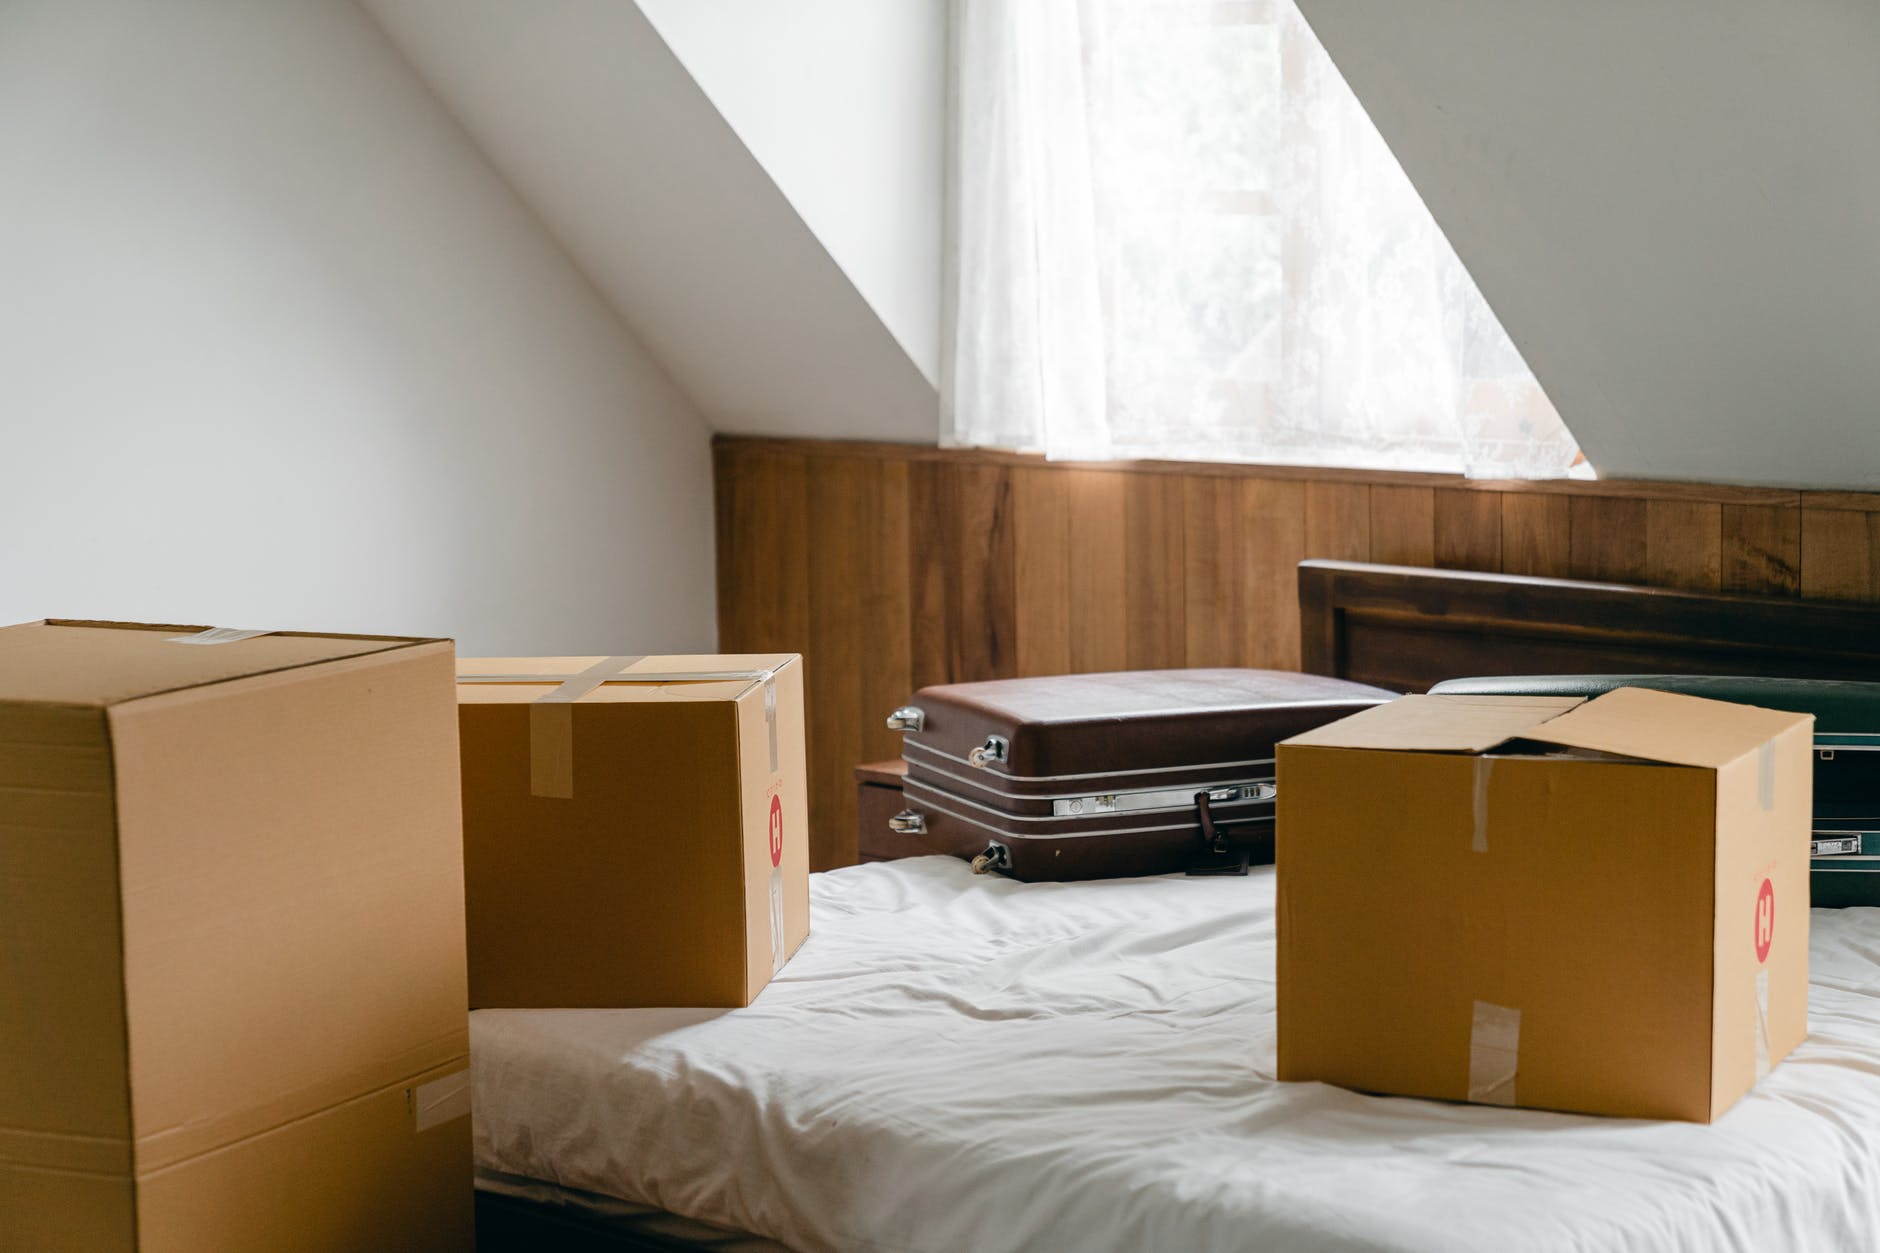 carton boxes and suitcases placed on bed in empty light room